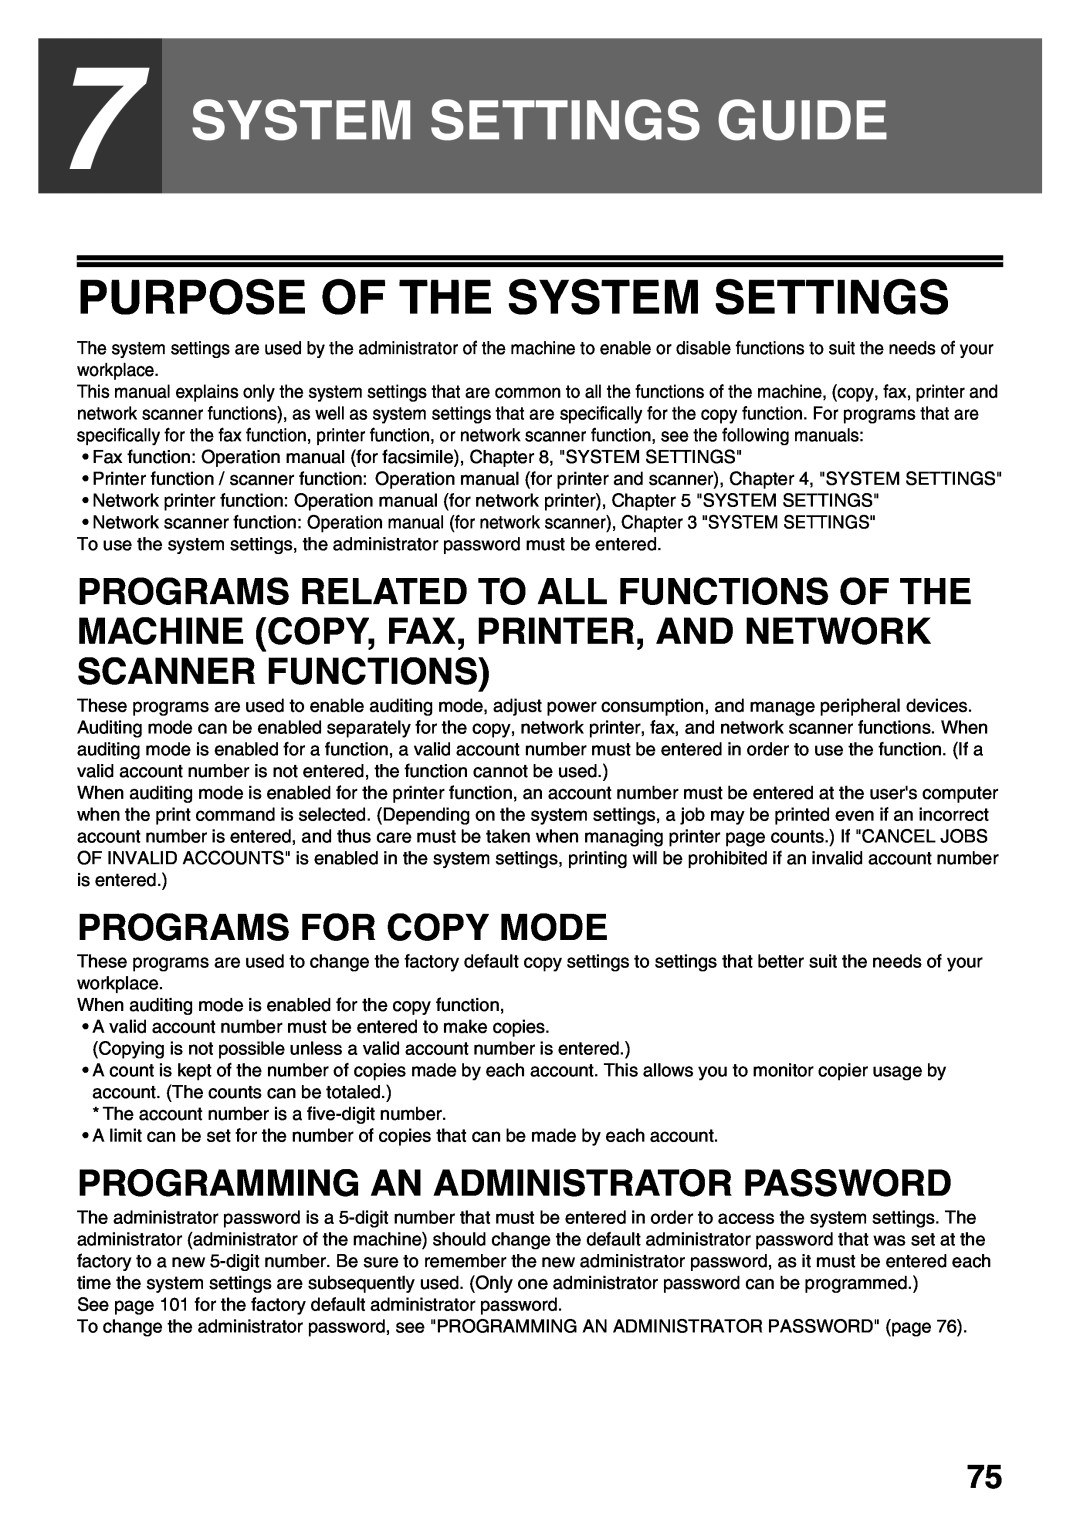 Sharp MX-M200D, MX-M160D operation manual System Settings Guide, Purpose Of The System Settings, Programs For Copy Mode 